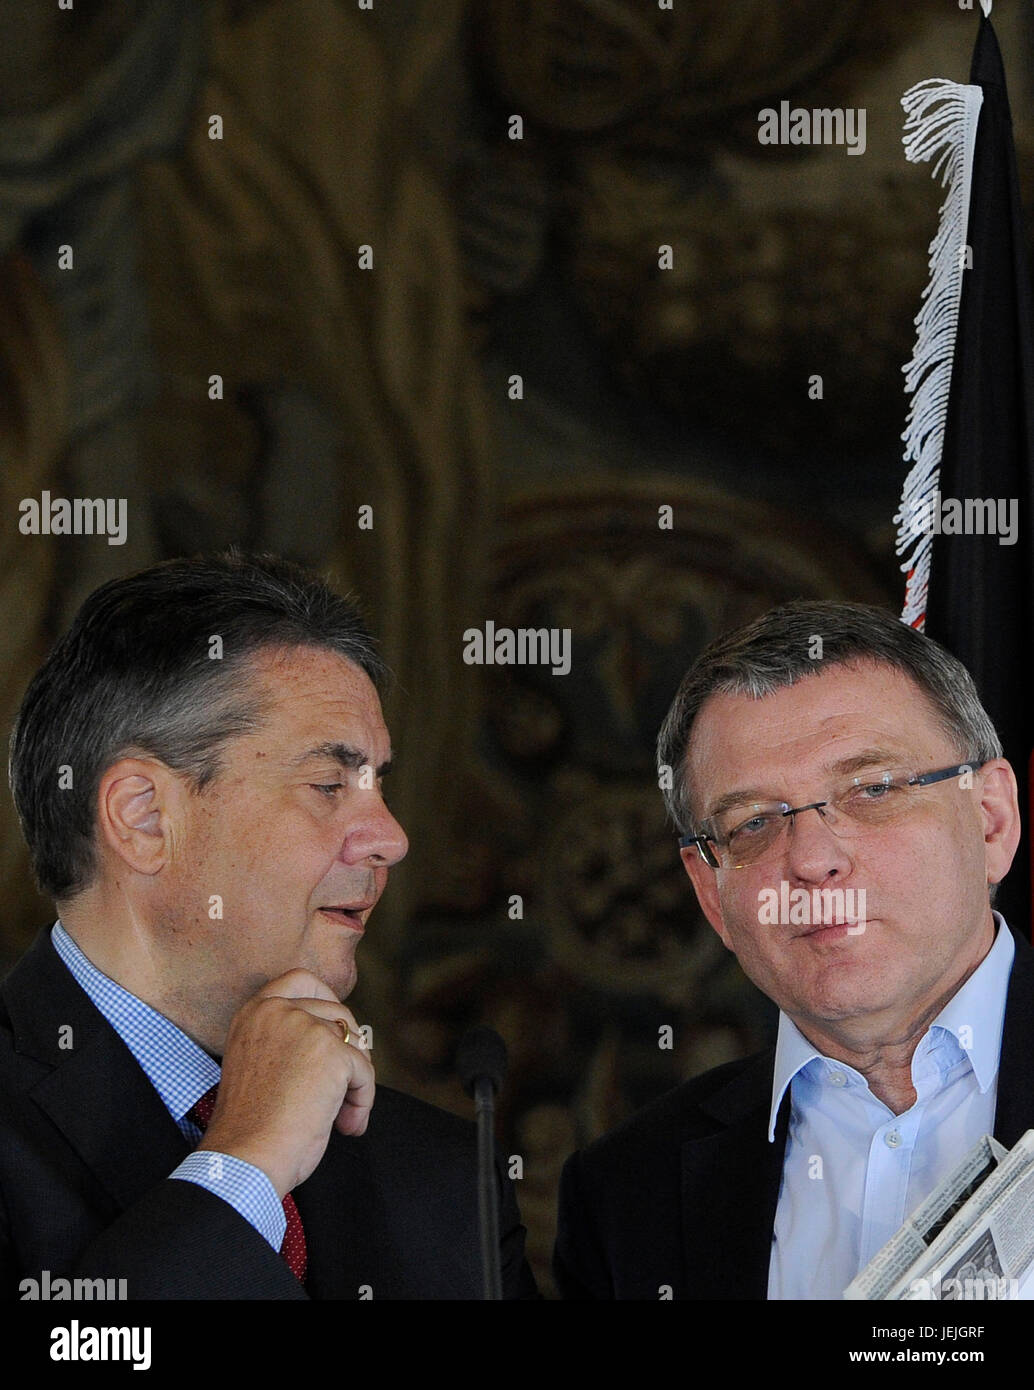 German Foreign Minister Sigmar Gabriel (left) and Czech Foreign Minister Lubomir Zaoralek attend the press conference after their meeting in Prague, Czech Republic, on June 24, 2017. Zaoralek rejected comparing the European Union with the former Warsaw Pact and life conditions in the former eastern bloc in reaction to a question about President Milos Zeman's recent statement. (CTK Photo/Ondrej Deml) Stock Photo